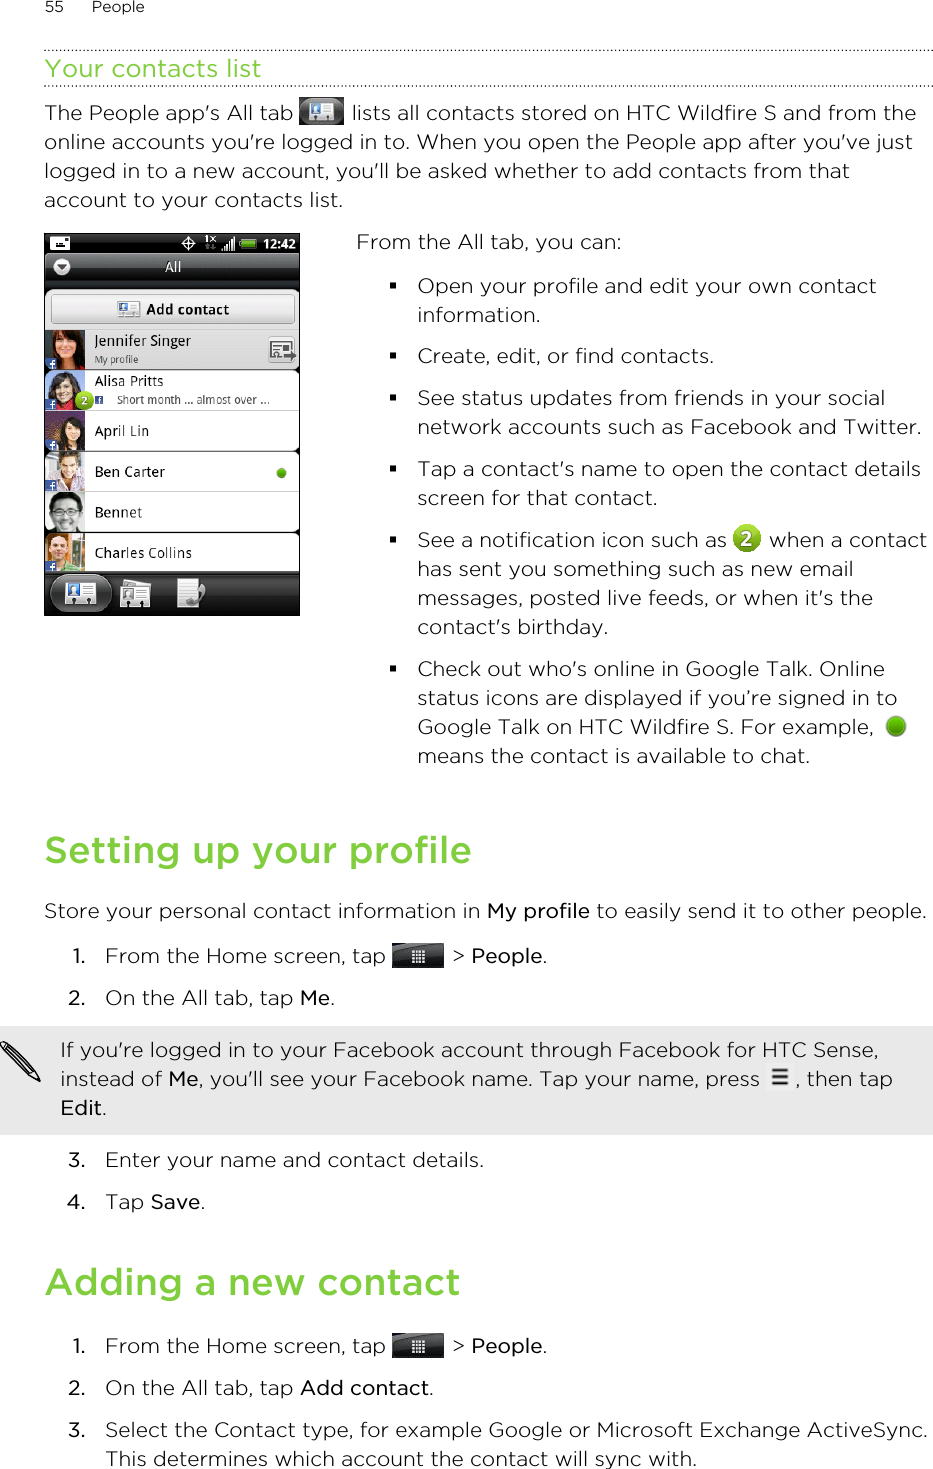 Your contacts listThe People app&apos;s All tab   lists all contacts stored on HTC Wildfire S and from theonline accounts you&apos;re logged in to. When you open the People app after you&apos;ve justlogged in to a new account, you&apos;ll be asked whether to add contacts from thataccount to your contacts list.From the All tab, you can:§Open your profile and edit your own contactinformation.§Create, edit, or find contacts.§See status updates from friends in your socialnetwork accounts such as Facebook and Twitter.§Tap a contact&apos;s name to open the contact detailsscreen for that contact.§See a notification icon such as   when a contacthas sent you something such as new emailmessages, posted live feeds, or when it&apos;s thecontact&apos;s birthday.§Check out who&apos;s online in Google Talk. Onlinestatus icons are displayed if you’re signed in toGoogle Talk on HTC Wildfire S. For example, means the contact is available to chat.Setting up your profileStore your personal contact information in My profile to easily send it to other people.1. From the Home screen, tap   &gt; People.2. On the All tab, tap Me. If you&apos;re logged in to your Facebook account through Facebook for HTC Sense,instead of Me, you&apos;ll see your Facebook name. Tap your name, press  , then tapEdit.3. Enter your name and contact details.4. Tap Save.Adding a new contact1. From the Home screen, tap   &gt; People.2. On the All tab, tap Add contact.3. Select the Contact type, for example Google or Microsoft Exchange ActiveSync.This determines which account the contact will sync with.55 People